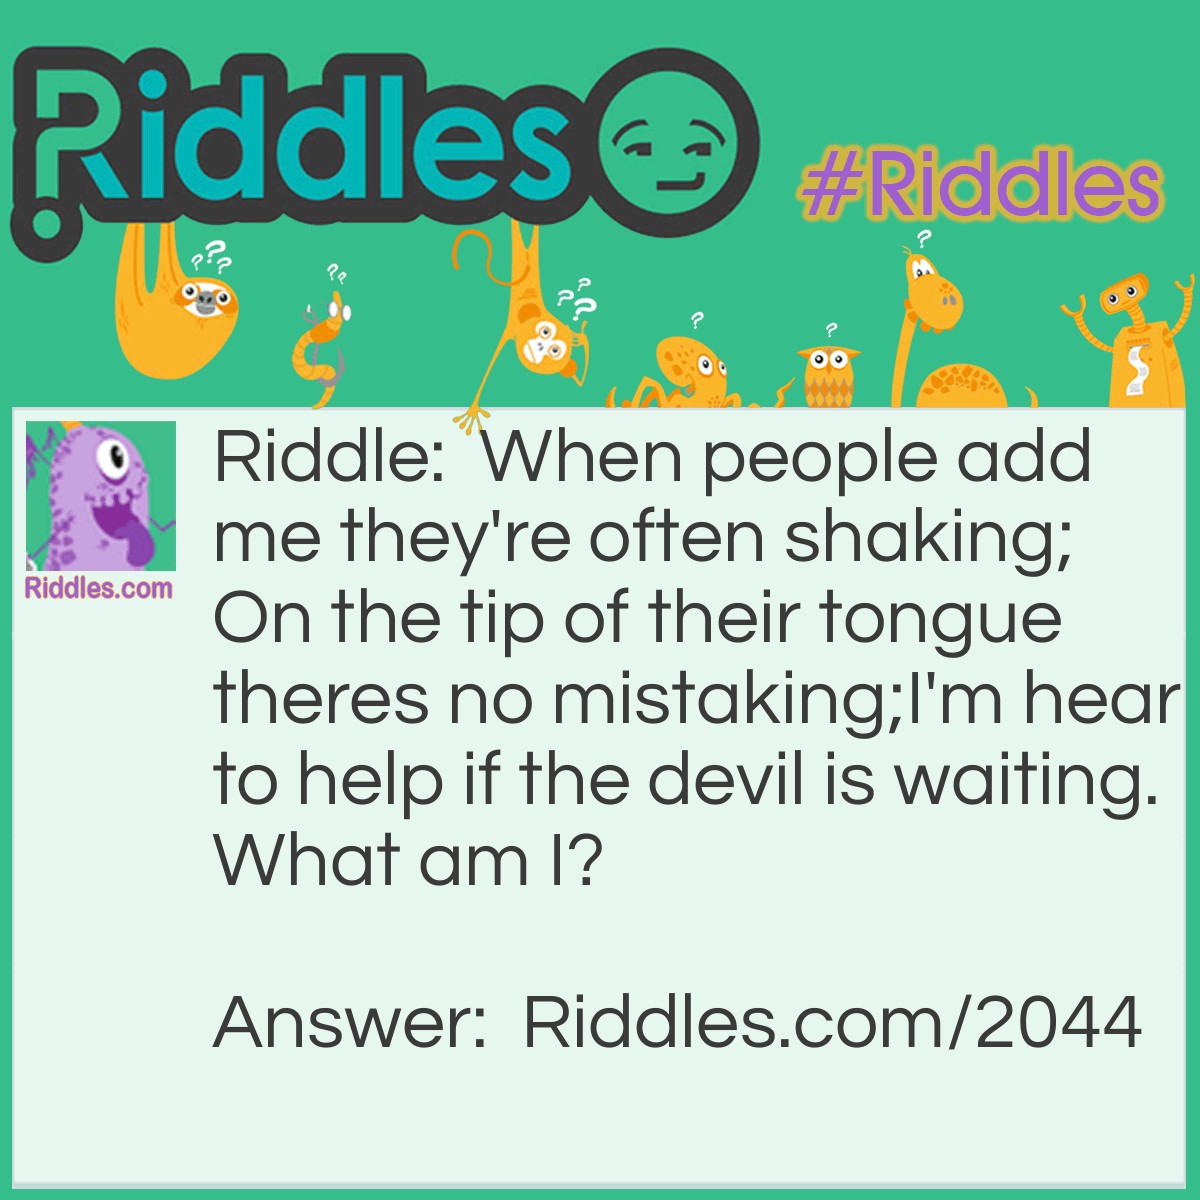 Riddle: When people add me they're often shaking;
On the tip of their tongue theres no mistaking;
I'm hear to help if the devil is waiting.
What am I? Answer: Salt